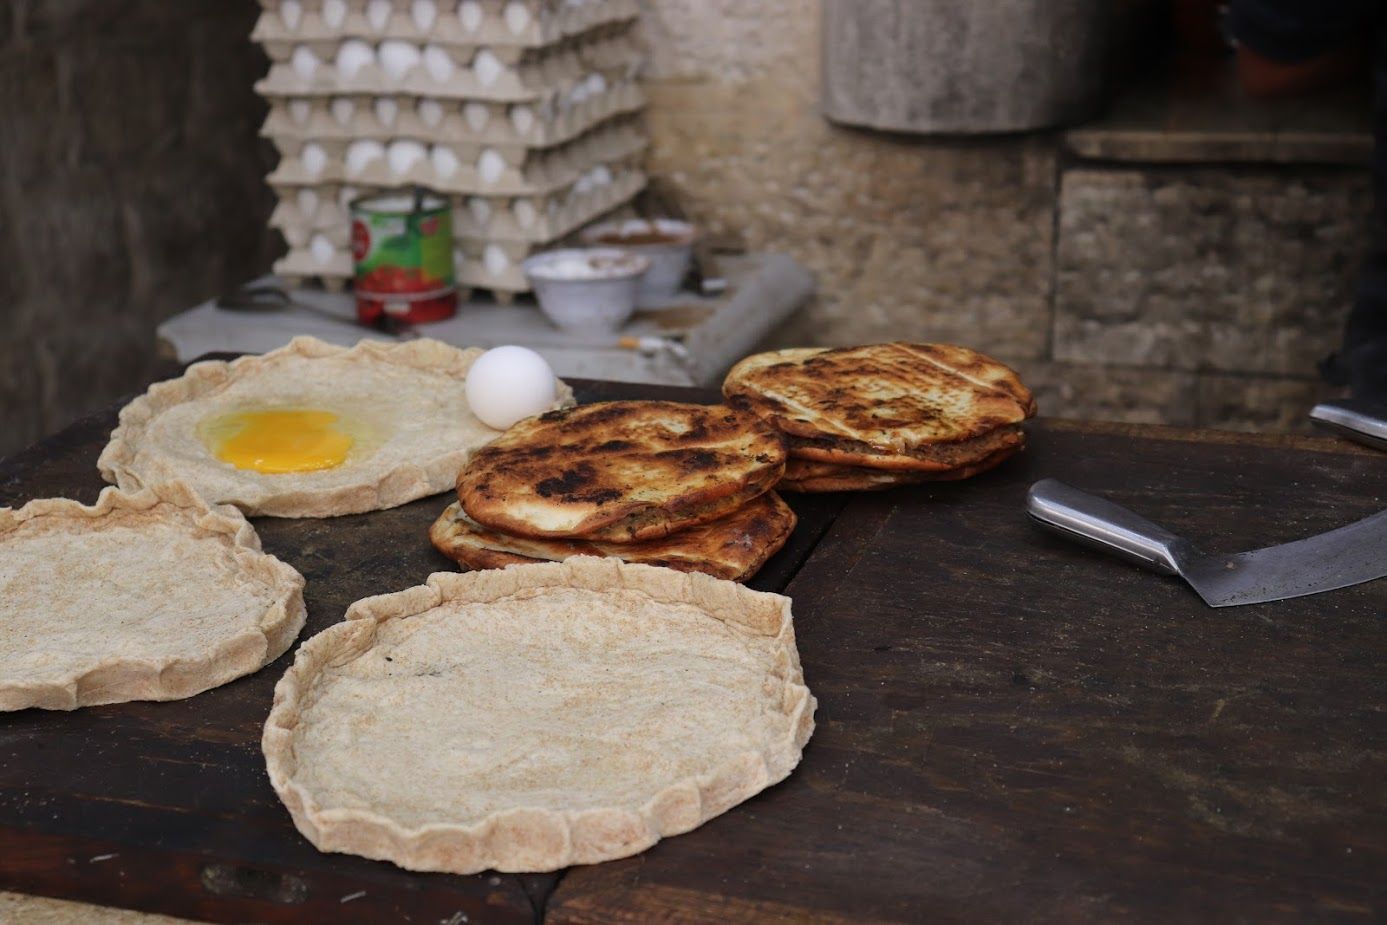 Palestinians eat qarib albyd and manaeesh daily. The former means egg boat, a literal description of the two eggs cracked into a wheat pastry crust and blitzed in a blazing hot oven. The latter is basically Palestinian pizza, a circular flatbread that can be covered with a wide variety of toppings. Here, a simple but timeless version—za’atar with jibneh. Image by Carly Graf. Palestine, 2019.